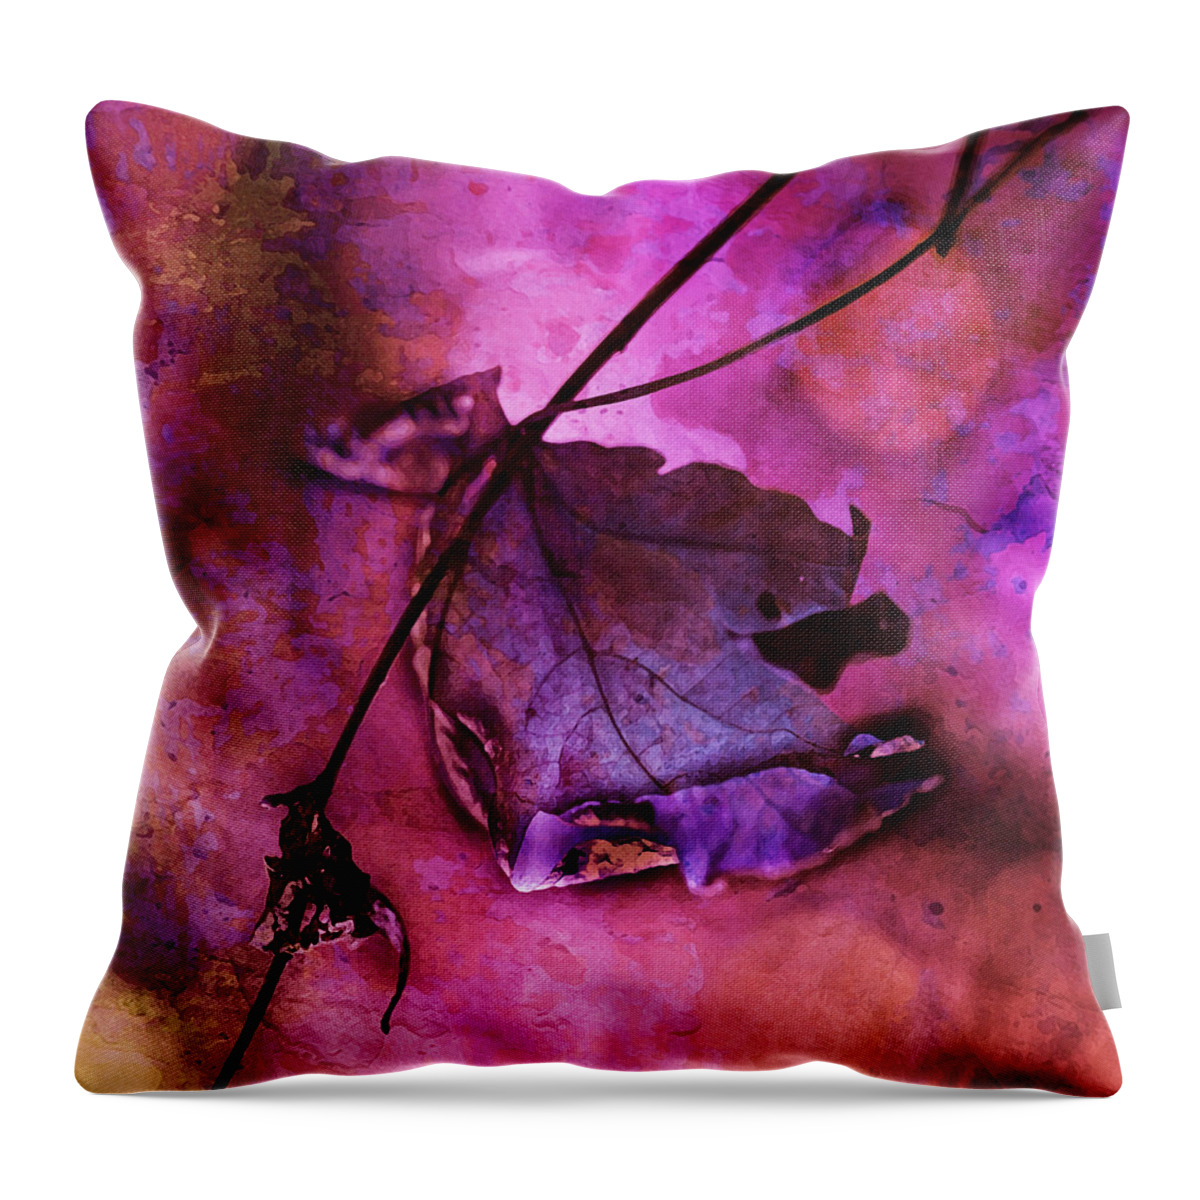 Abstract Leaf Throw Pillow featuring the painting Love Hangs On by Bonnie Bruno